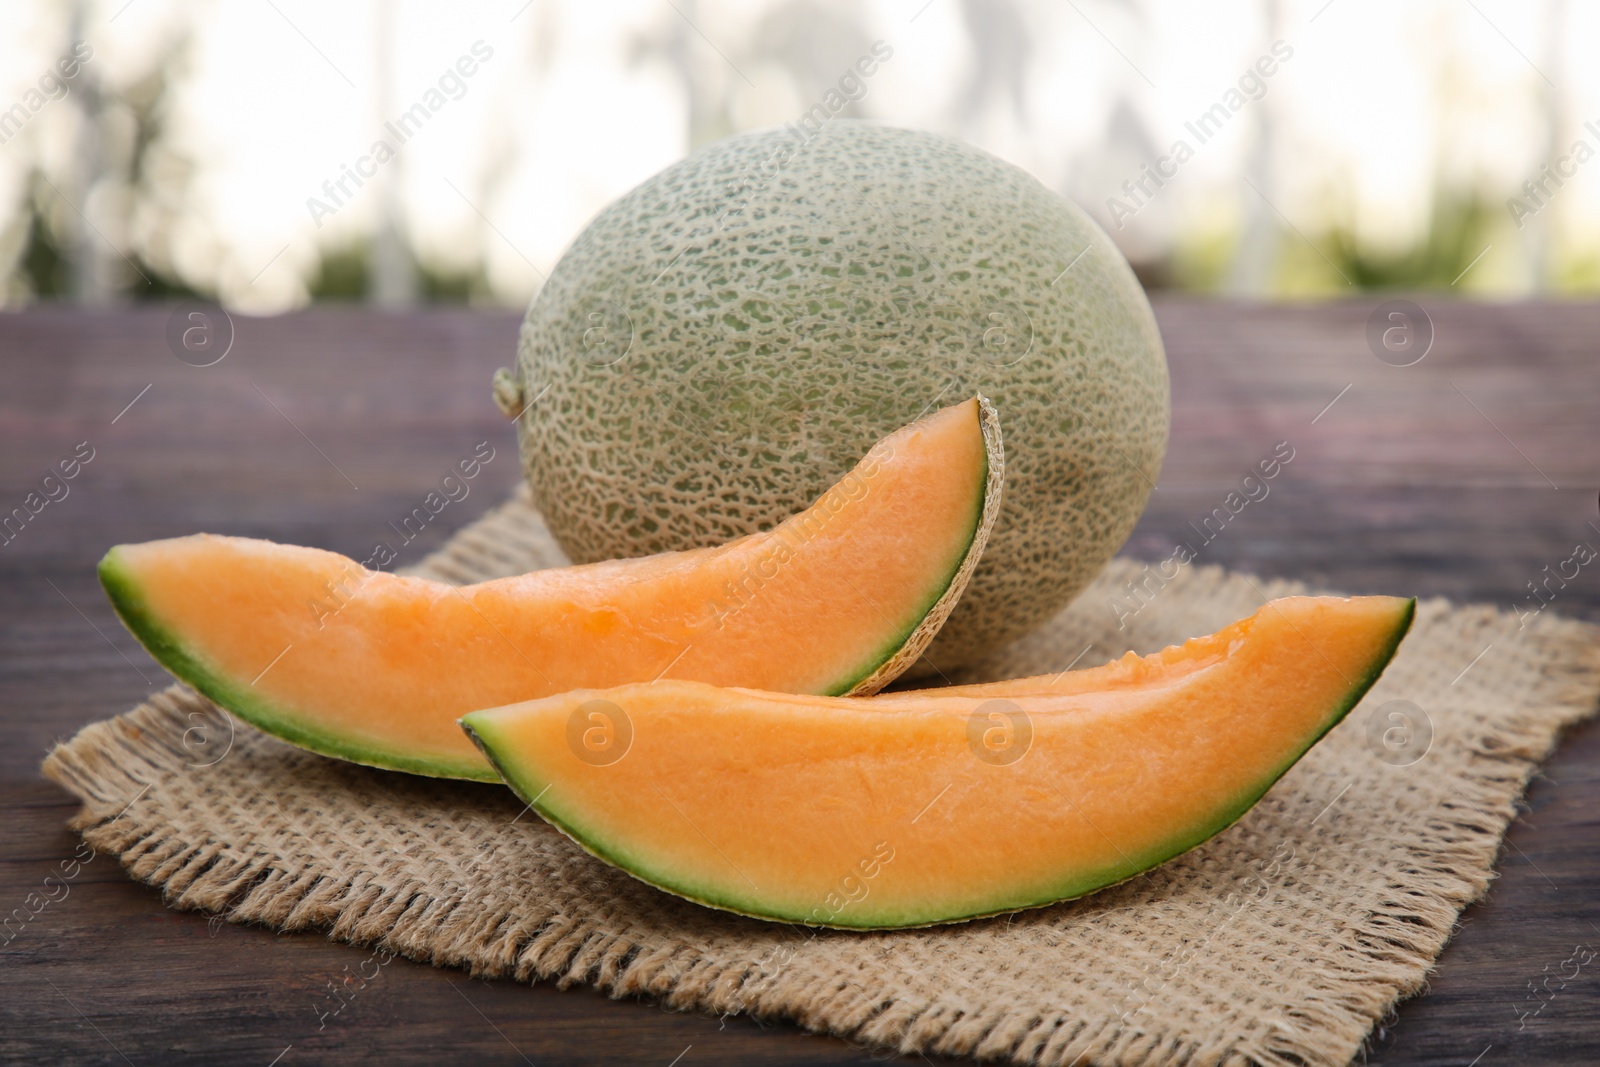 Photo of Cut and whole delicious ripe melons on wooden table outdoors